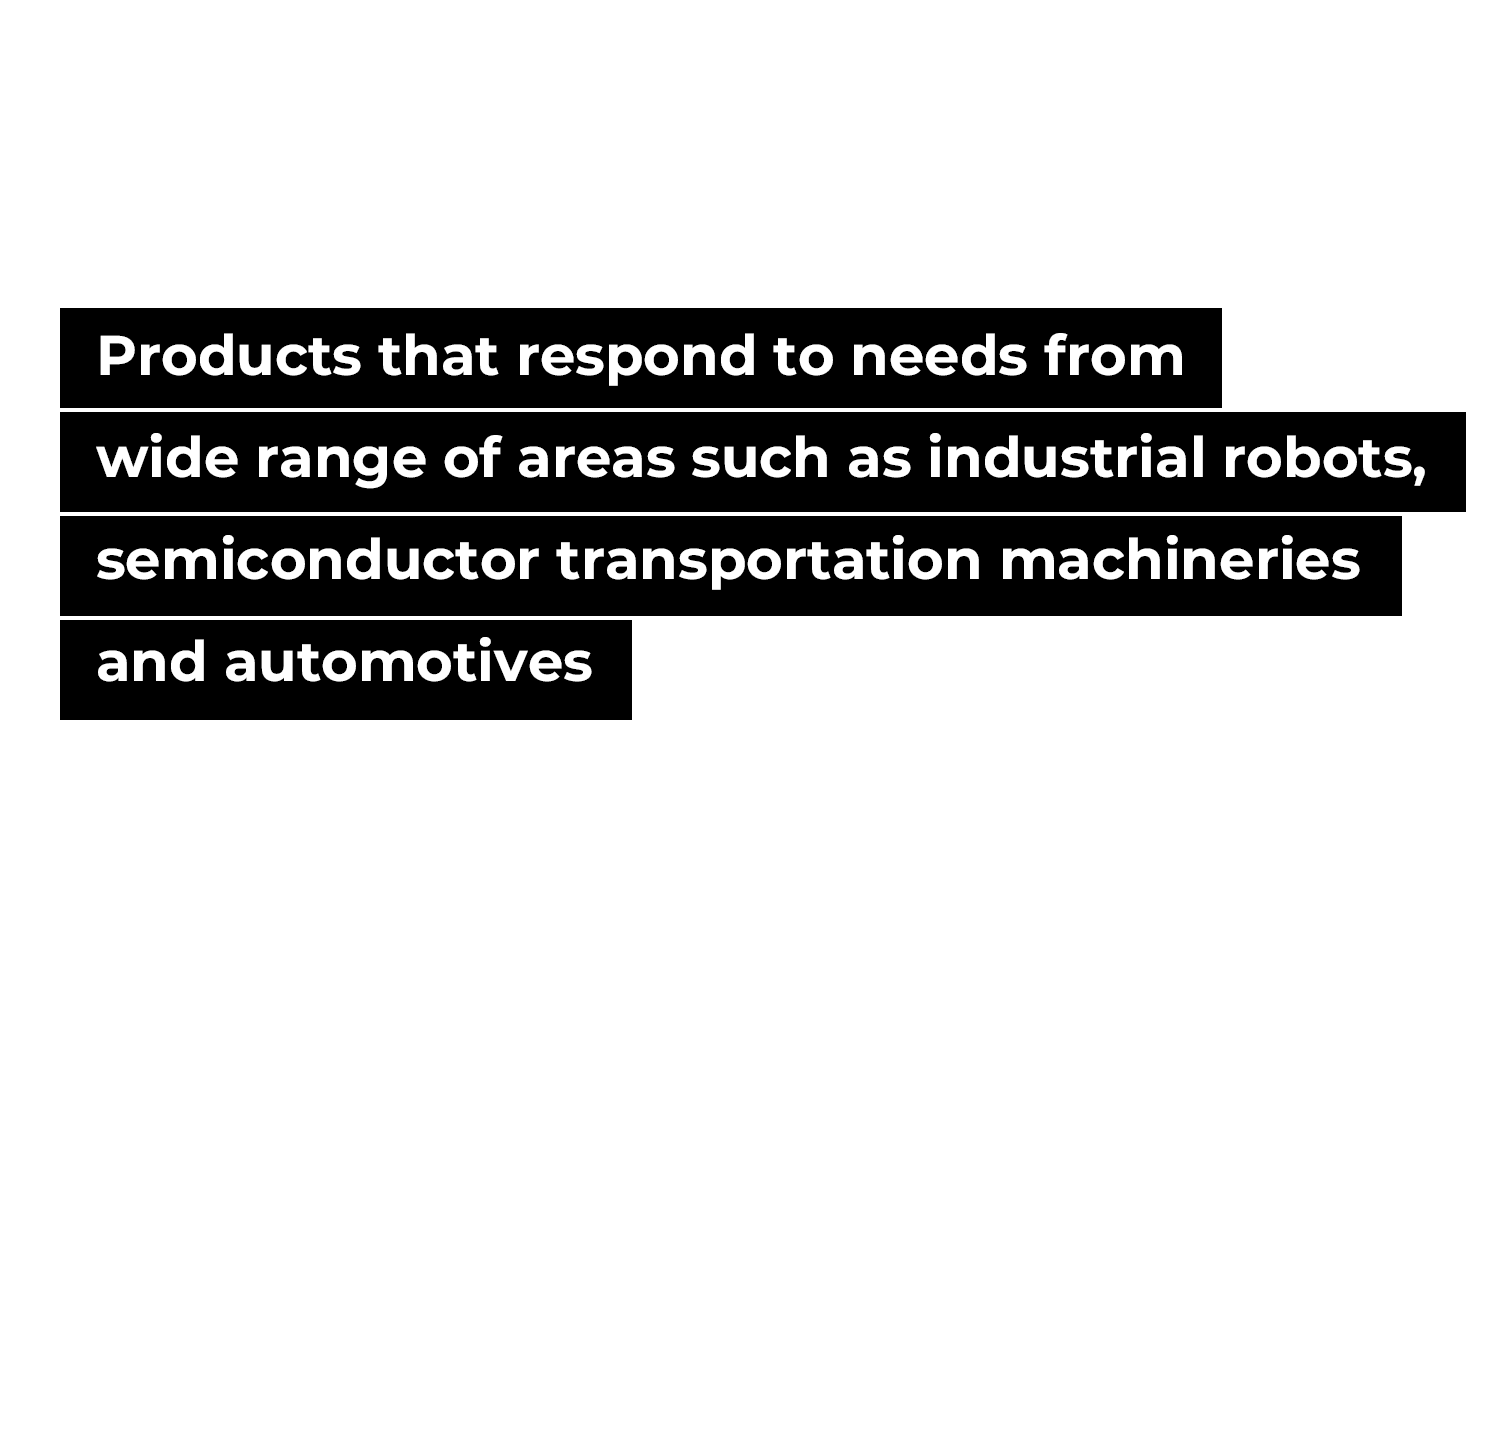 Products that respond to needs from wide range of areas such as industrial  robots, semiconductor transportation machineries and automotives.